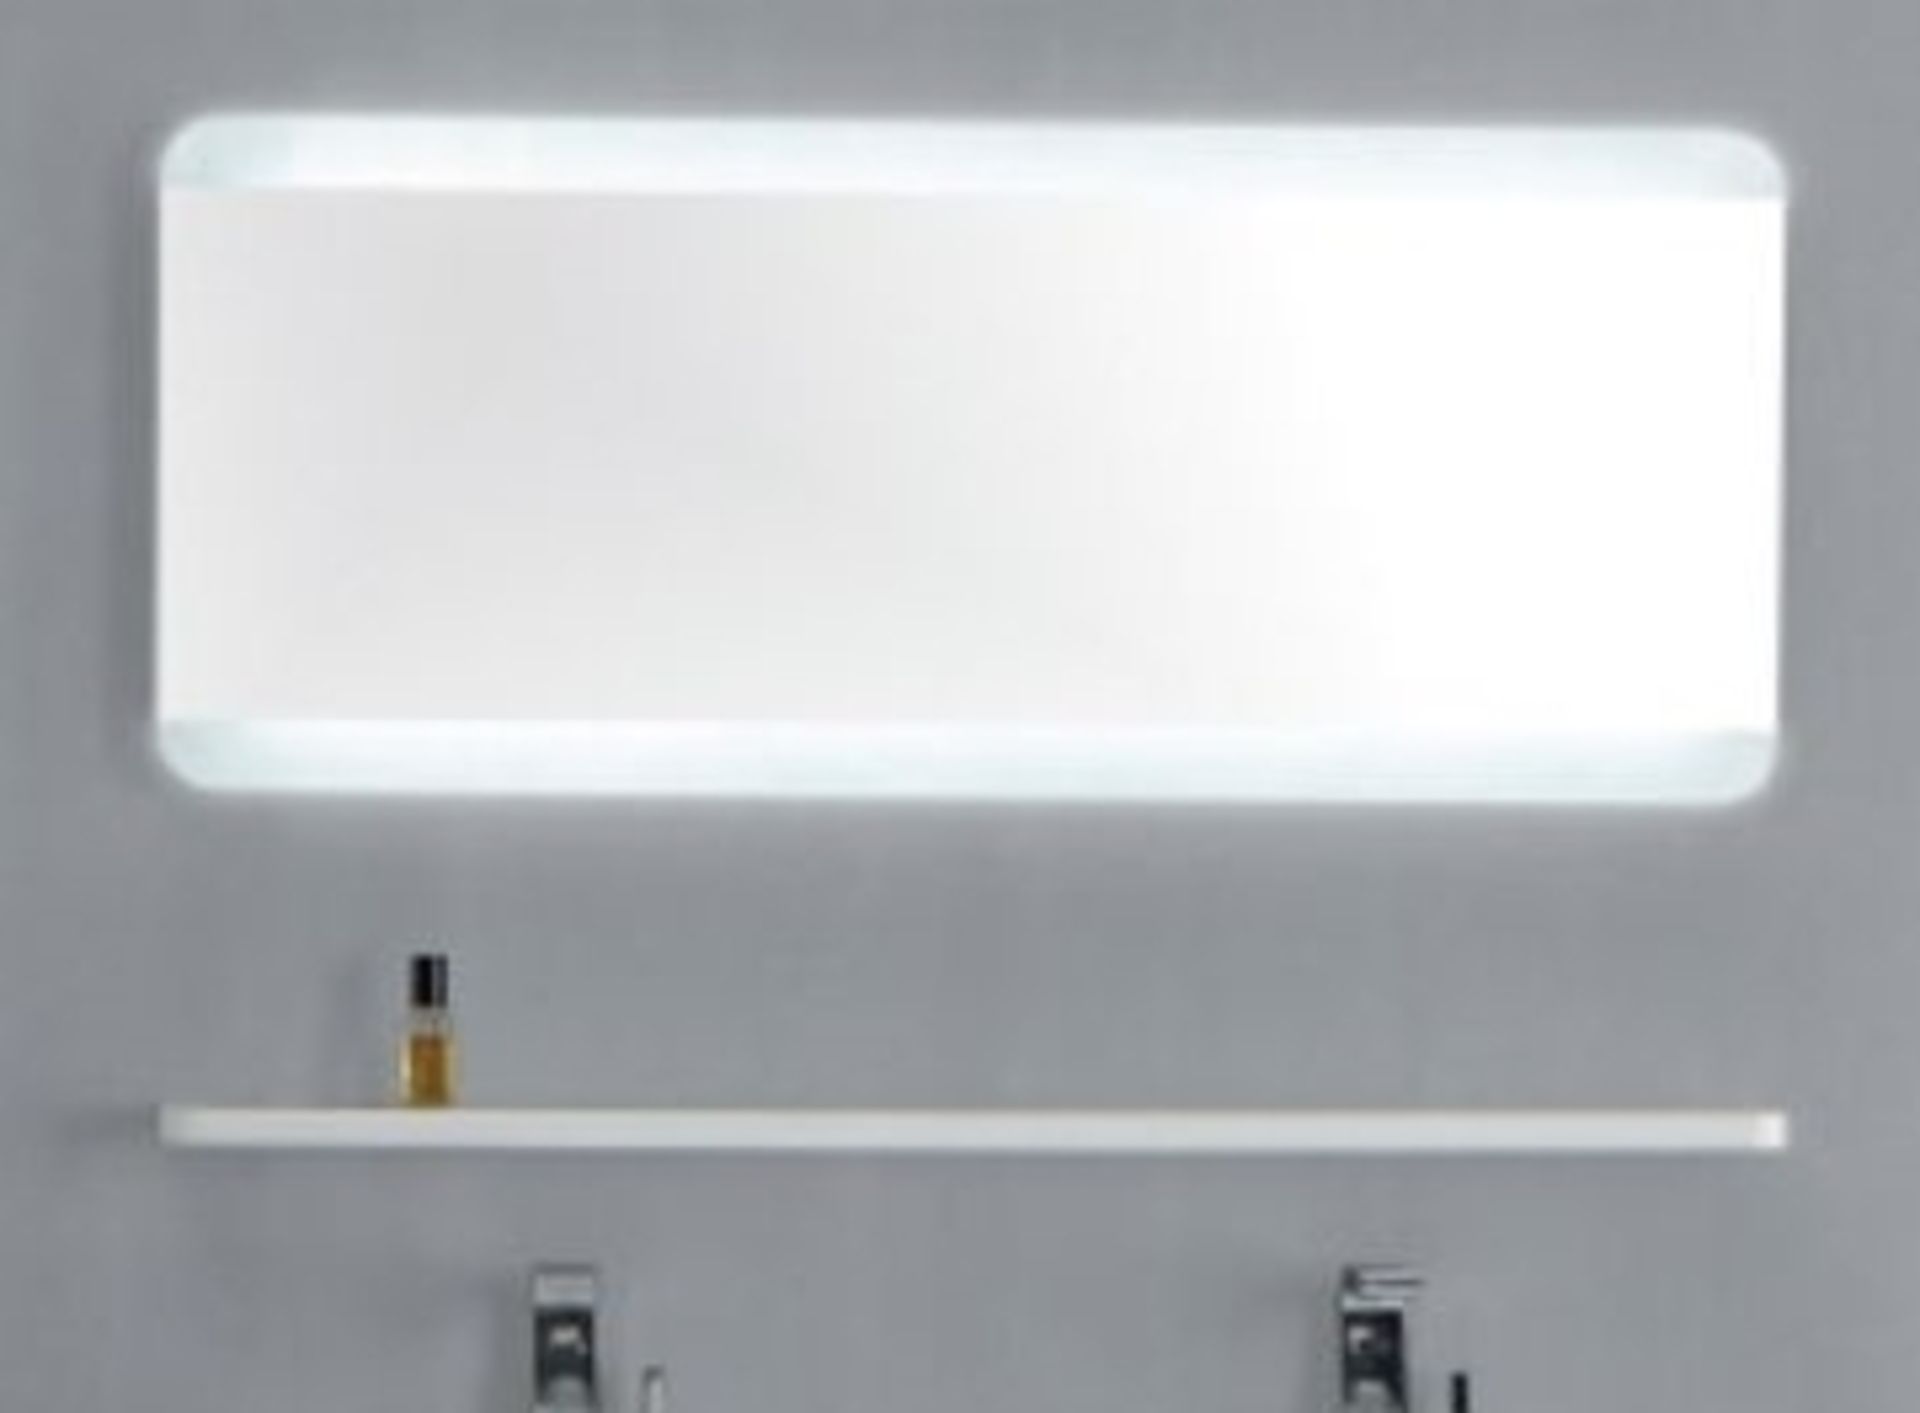 1 x Austin Bathrooms EDGE Backlit 600mm Illuminated Wall Mirror With No Touch Sensors RRP £230